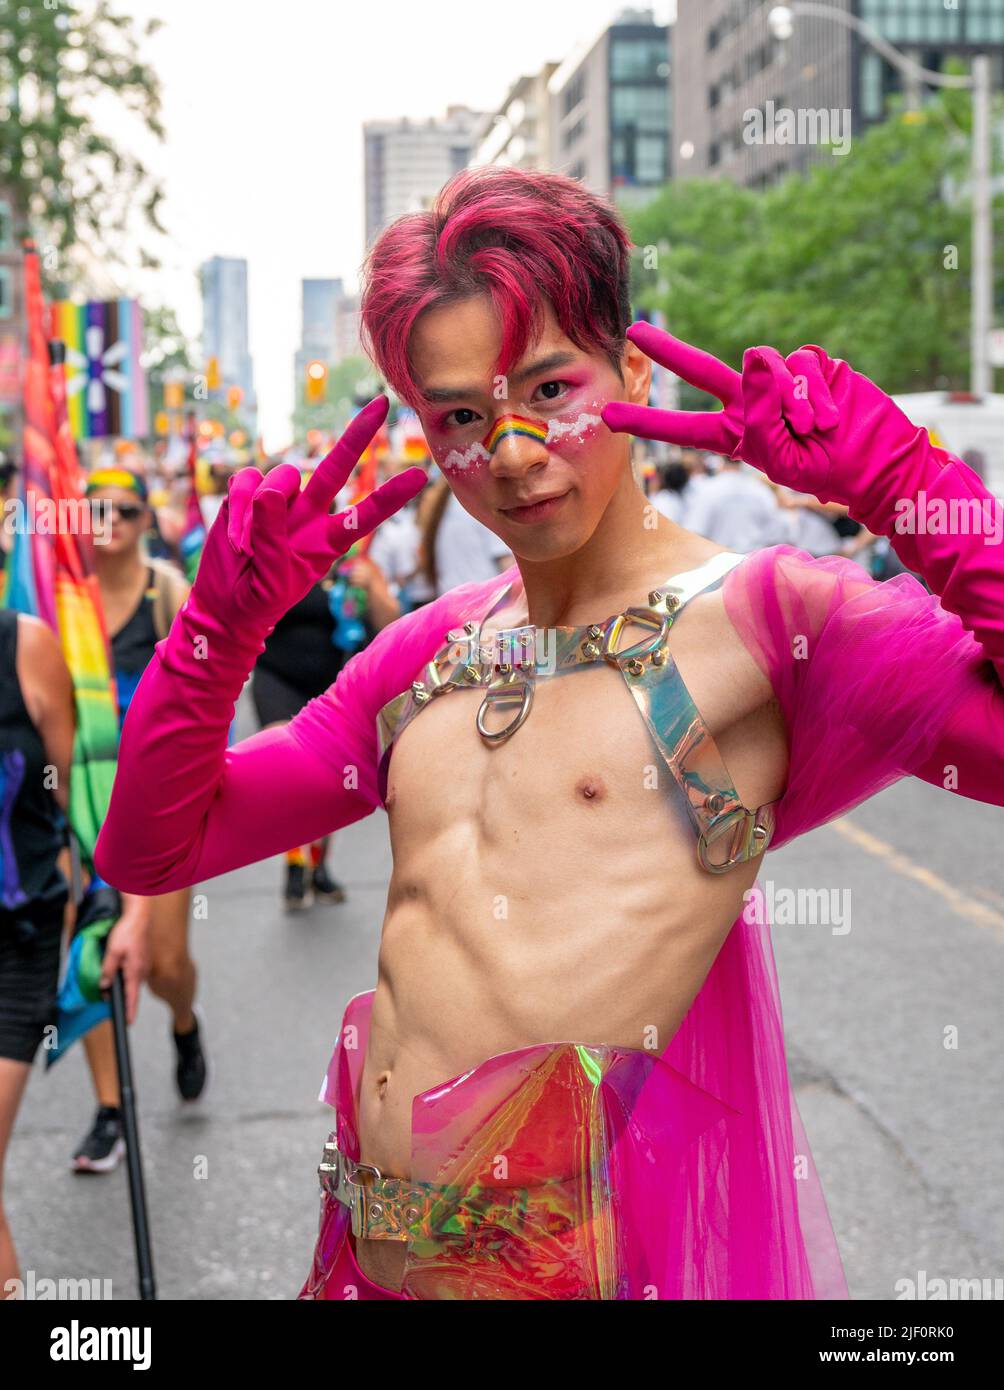 Medium shot of a young man wearing stage custom marching in front of a group during Pride Parade Stock Photo